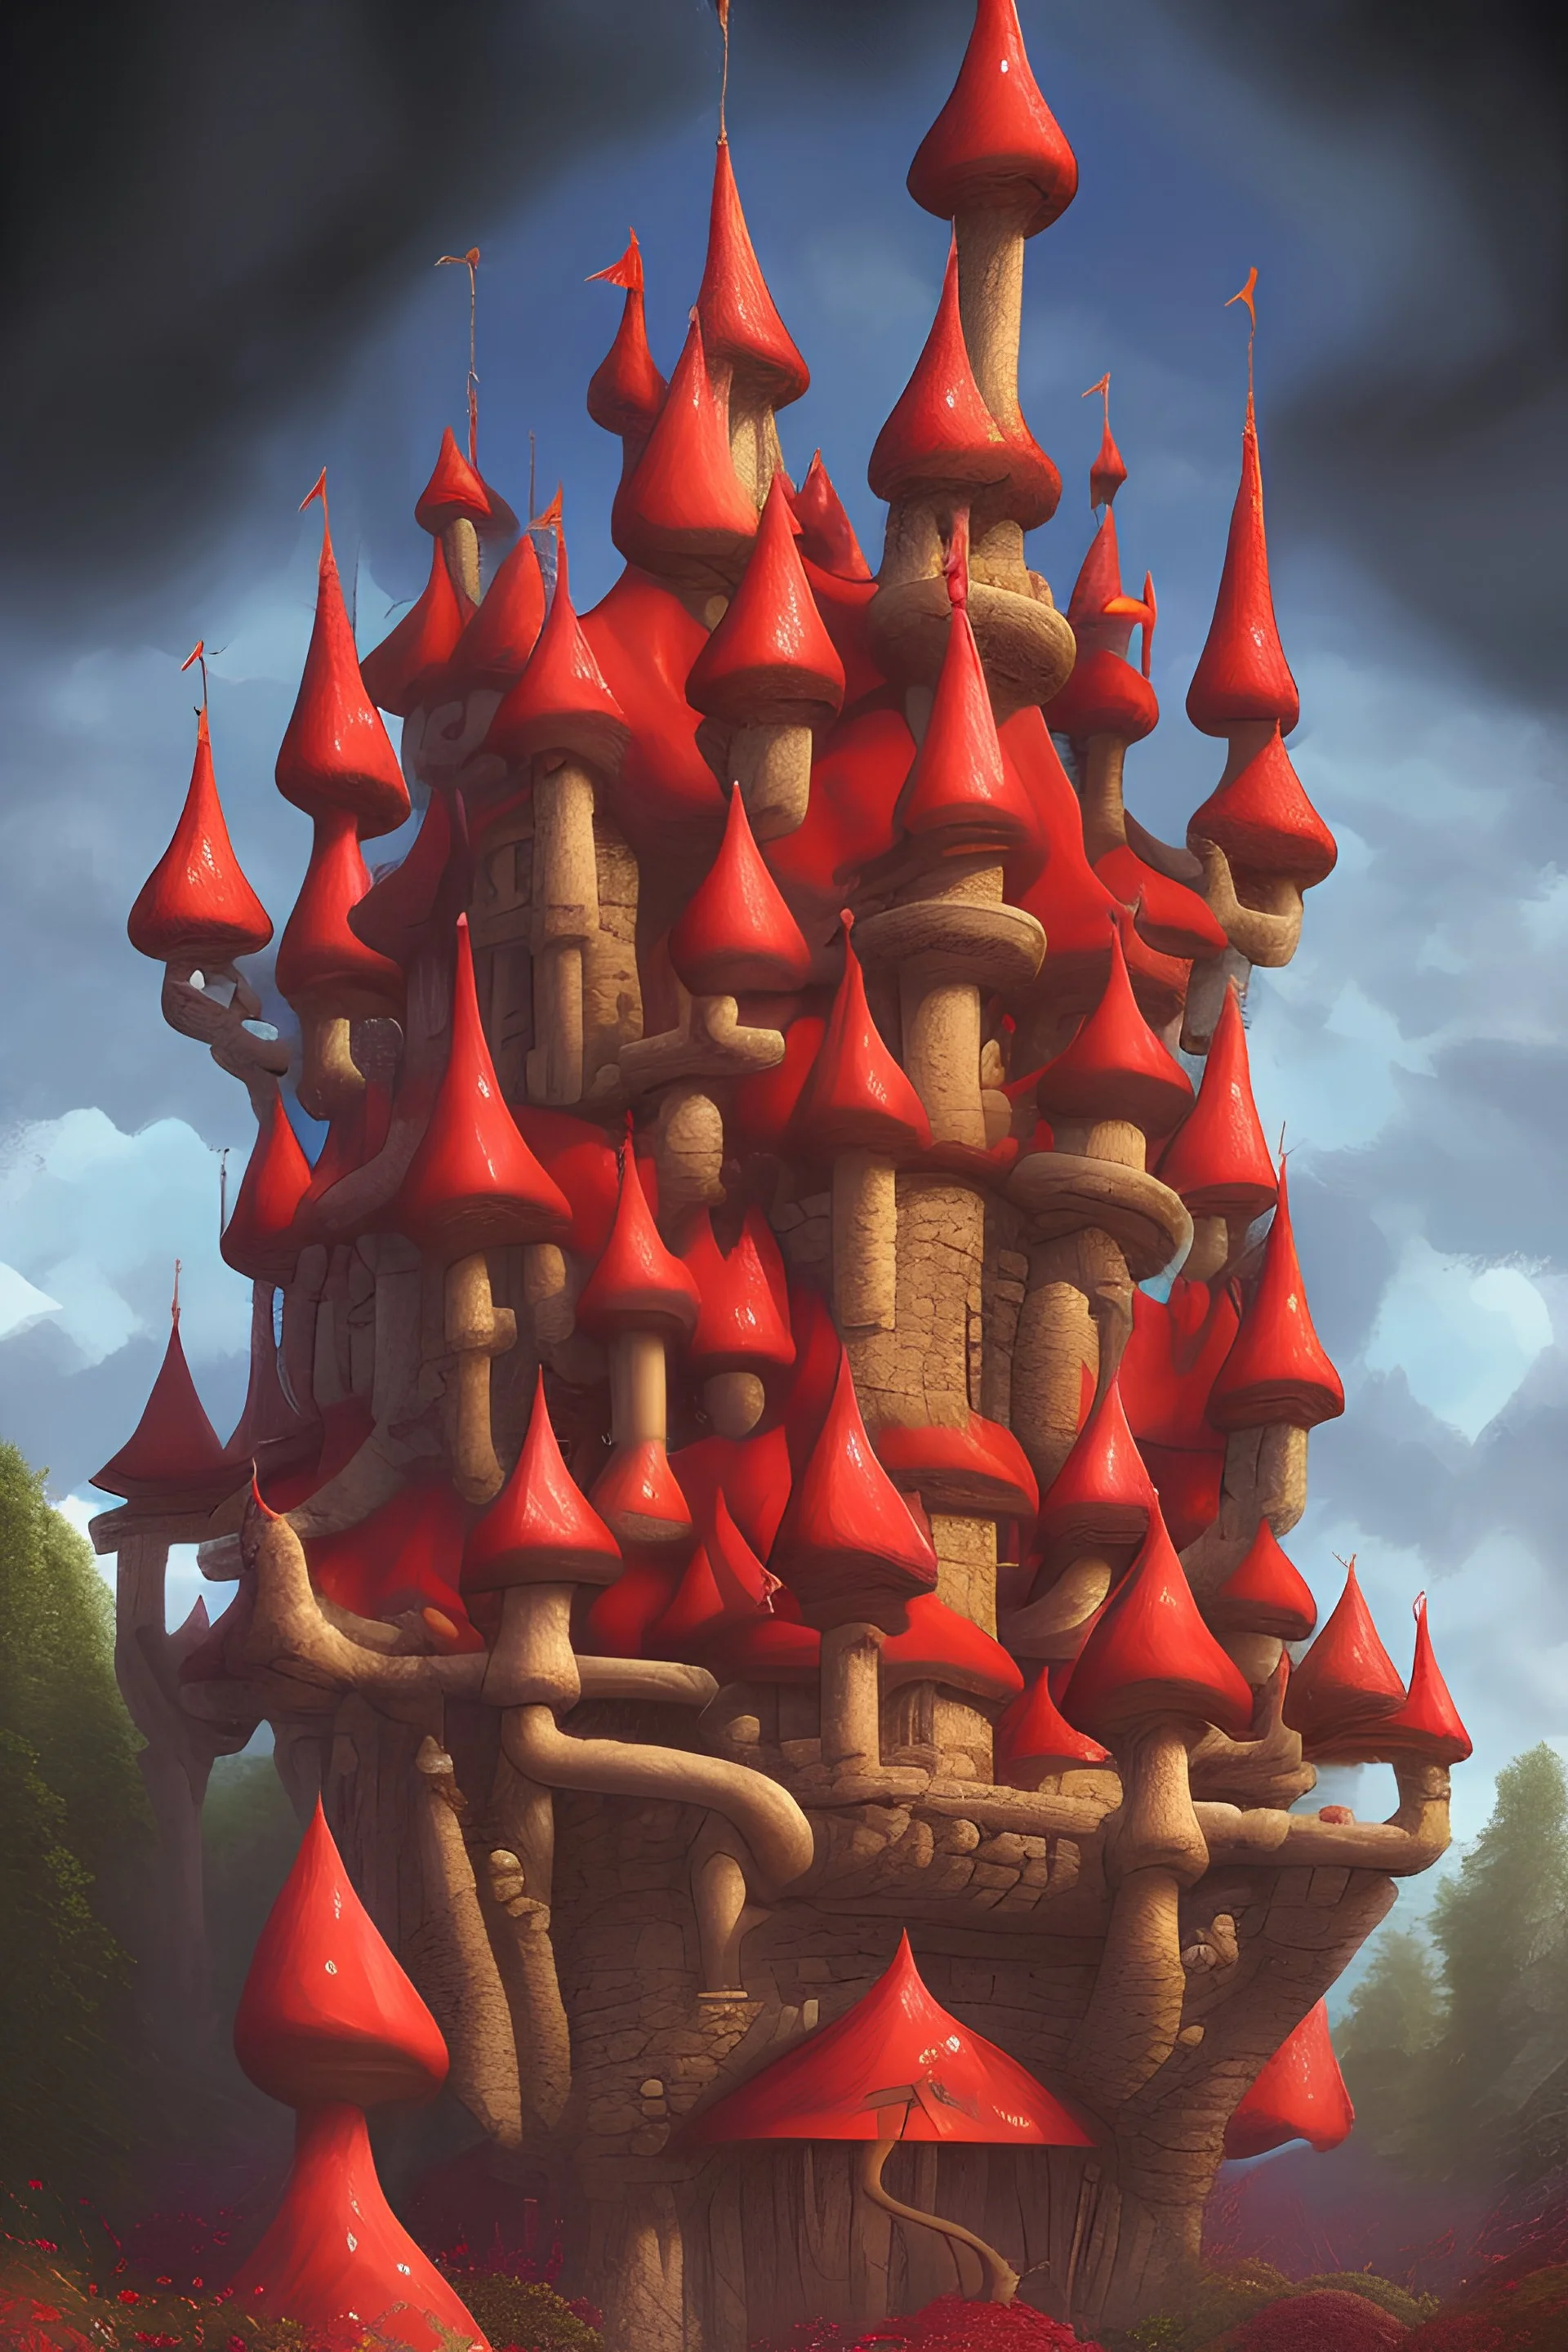 A castle of red mushrooms drawn in a cartoon and classic way